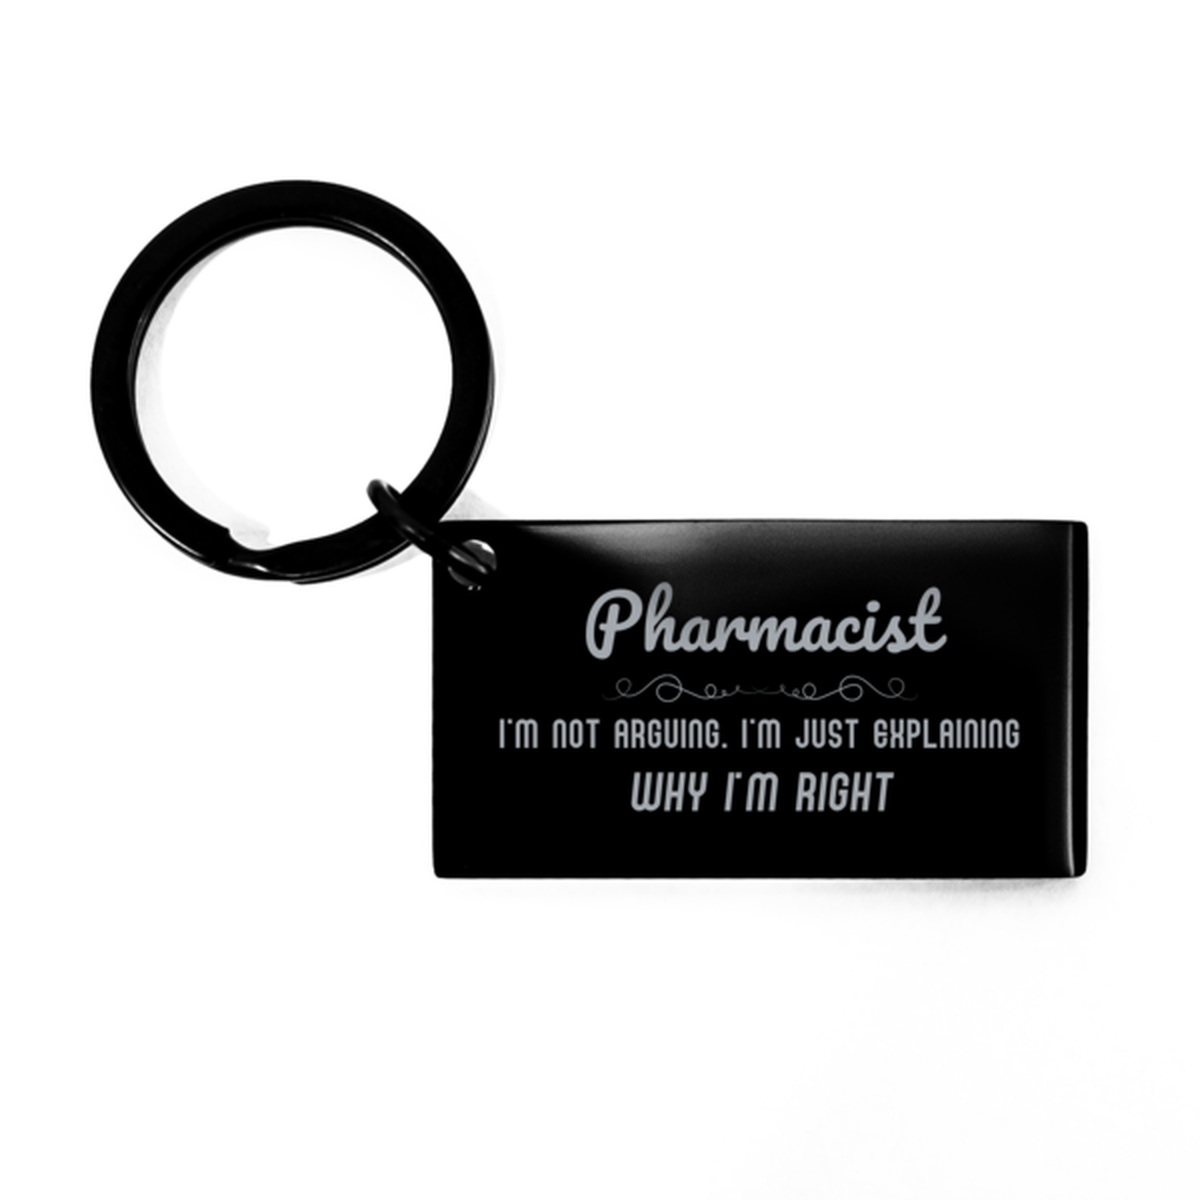 Pharmacist I'm not Arguing. I'm Just Explaining Why I'm RIGHT Keychain, Funny Saying Quote Pharmacist Gifts For Pharmacist Graduation Birthday Christmas Gifts for Men Women Coworker